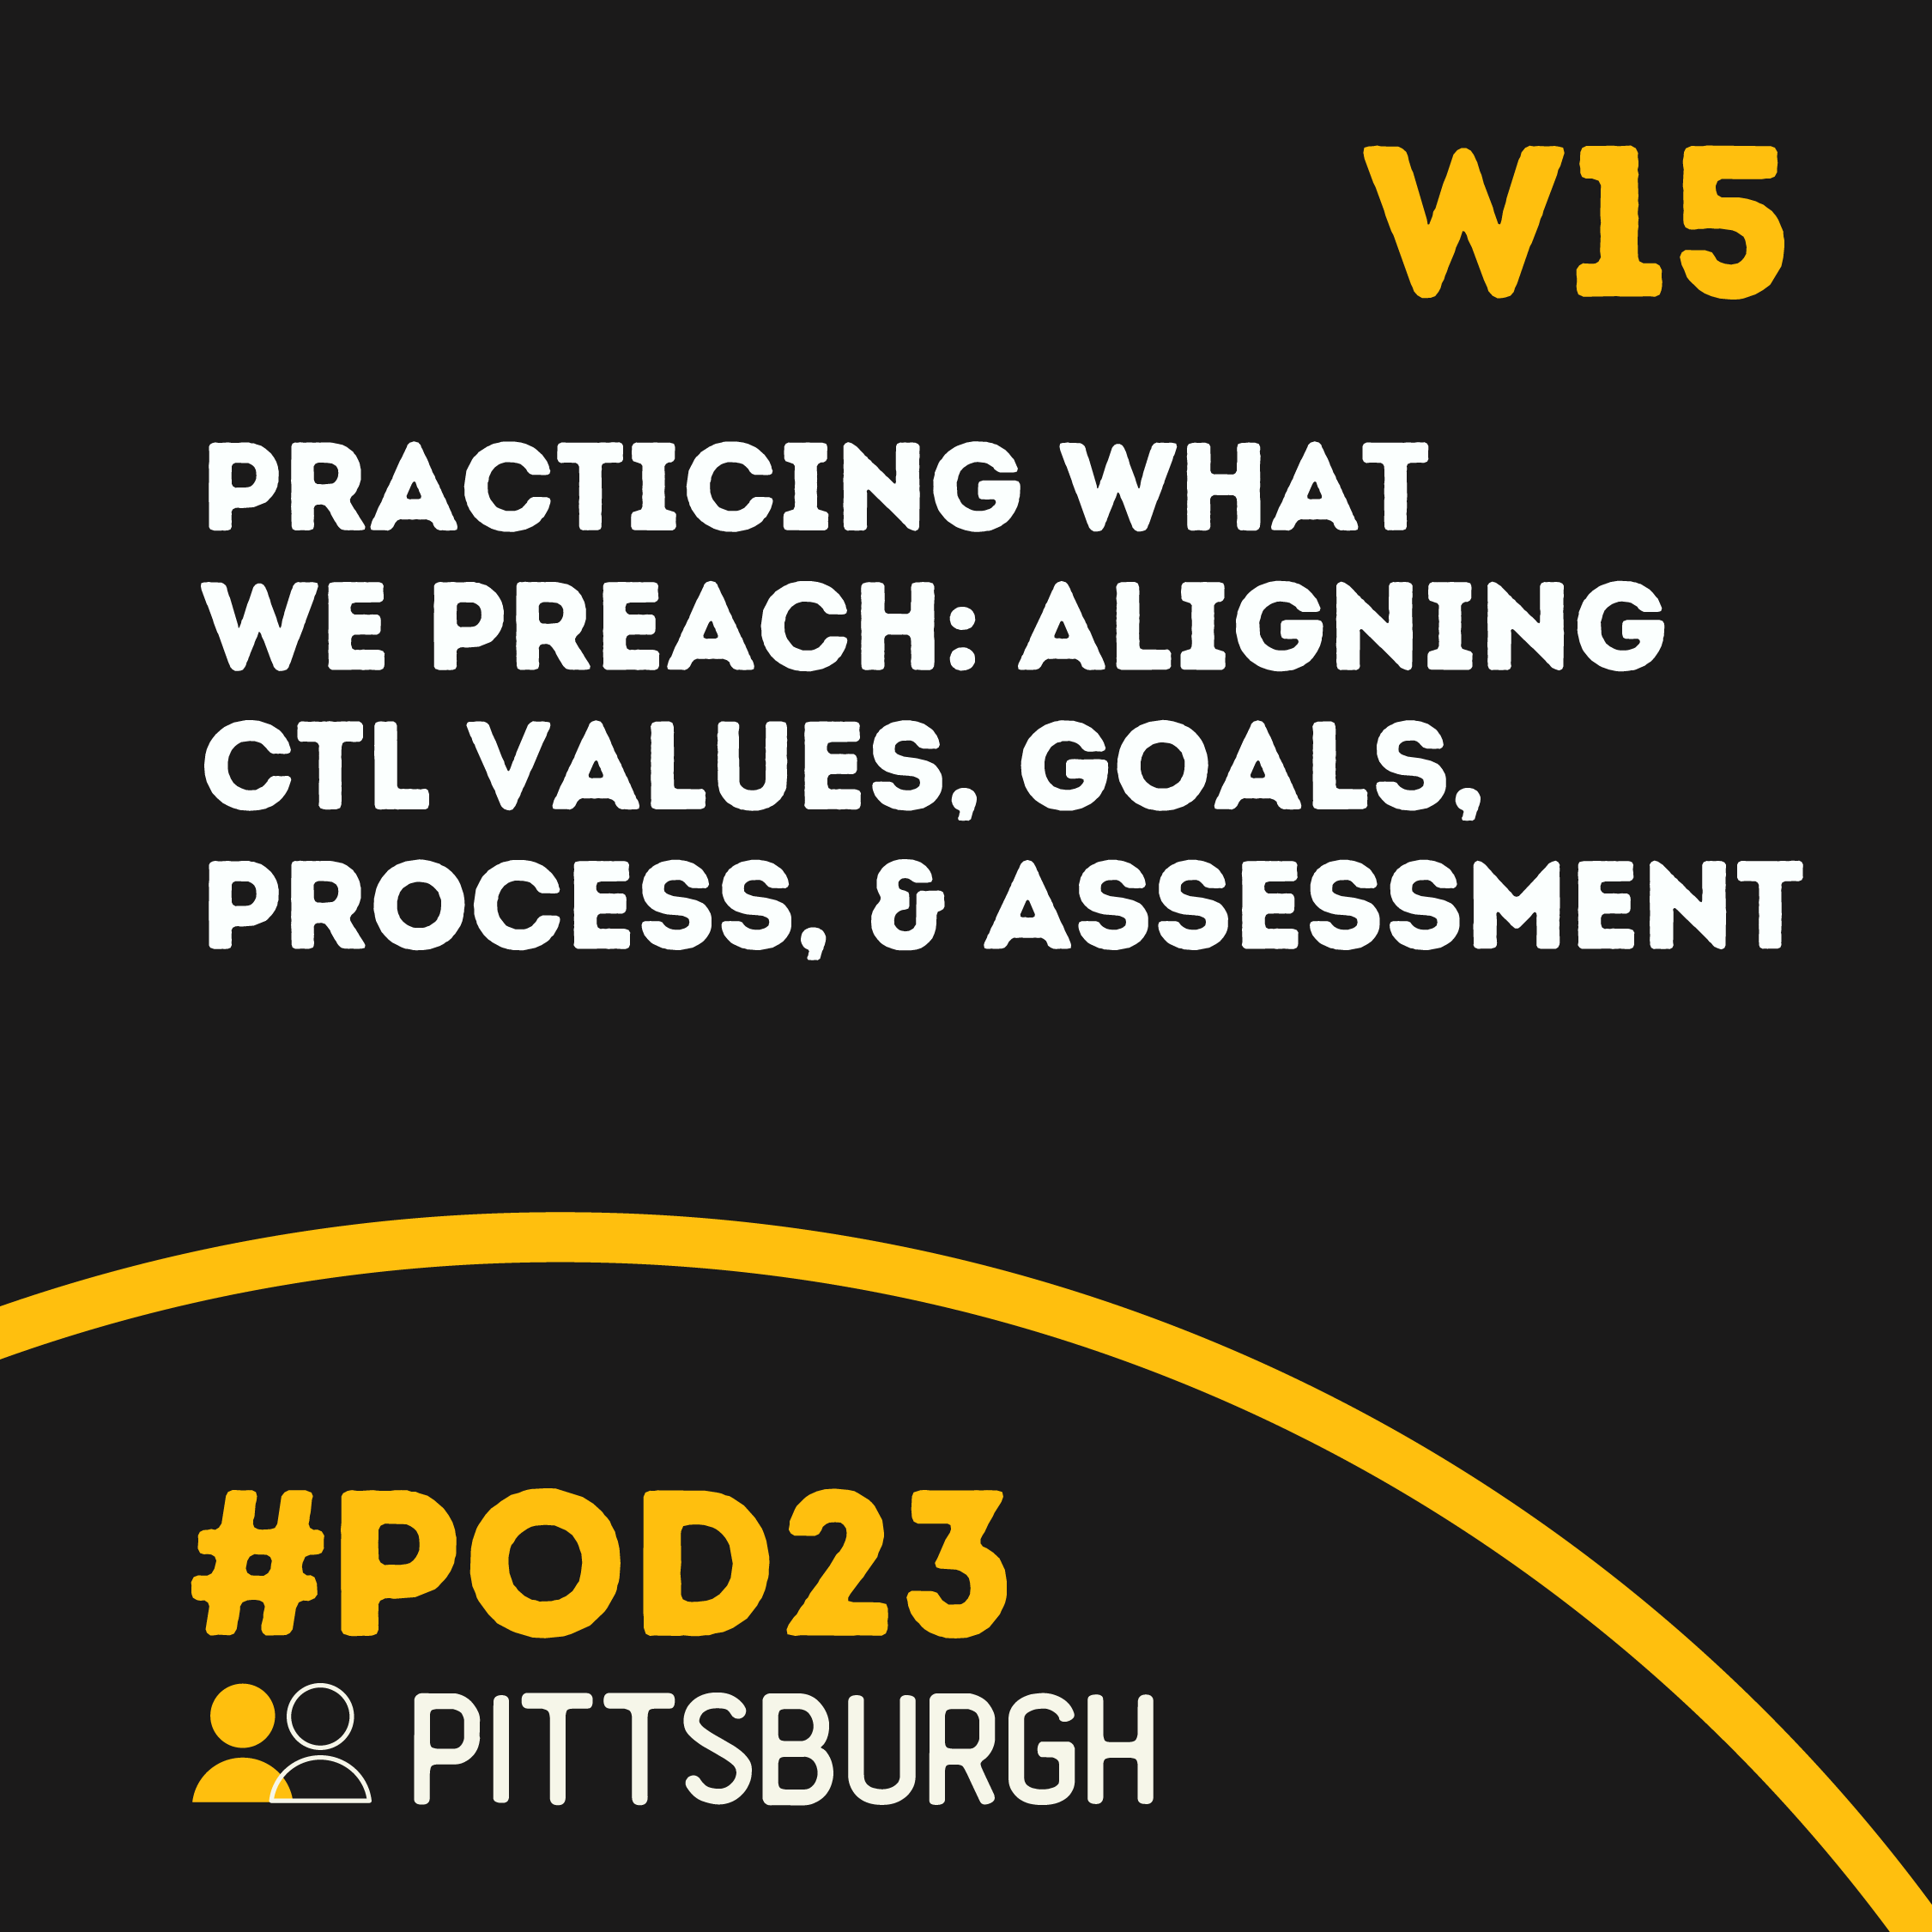 #POD23 W15: Practicing What We Preach: Aligning CTL Values, Goals, Process, & Assessment